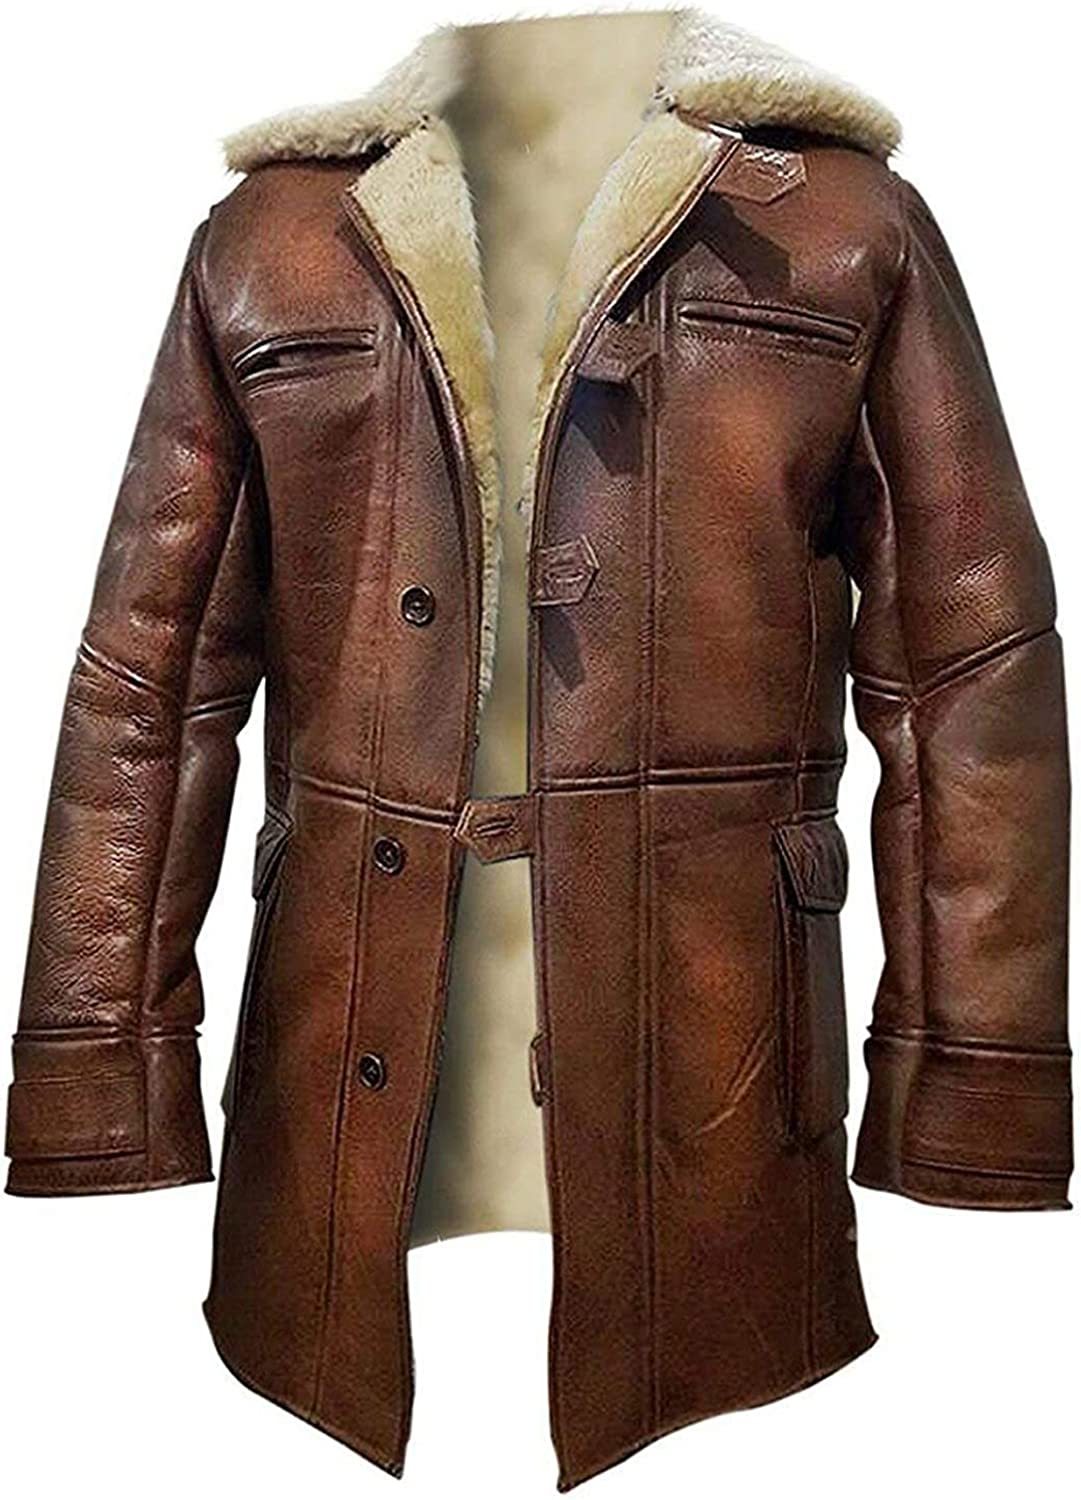 Prime-jackets/stacy Adams - Bane dark knight rises cosplay costume brown leather fur shearling trench coat